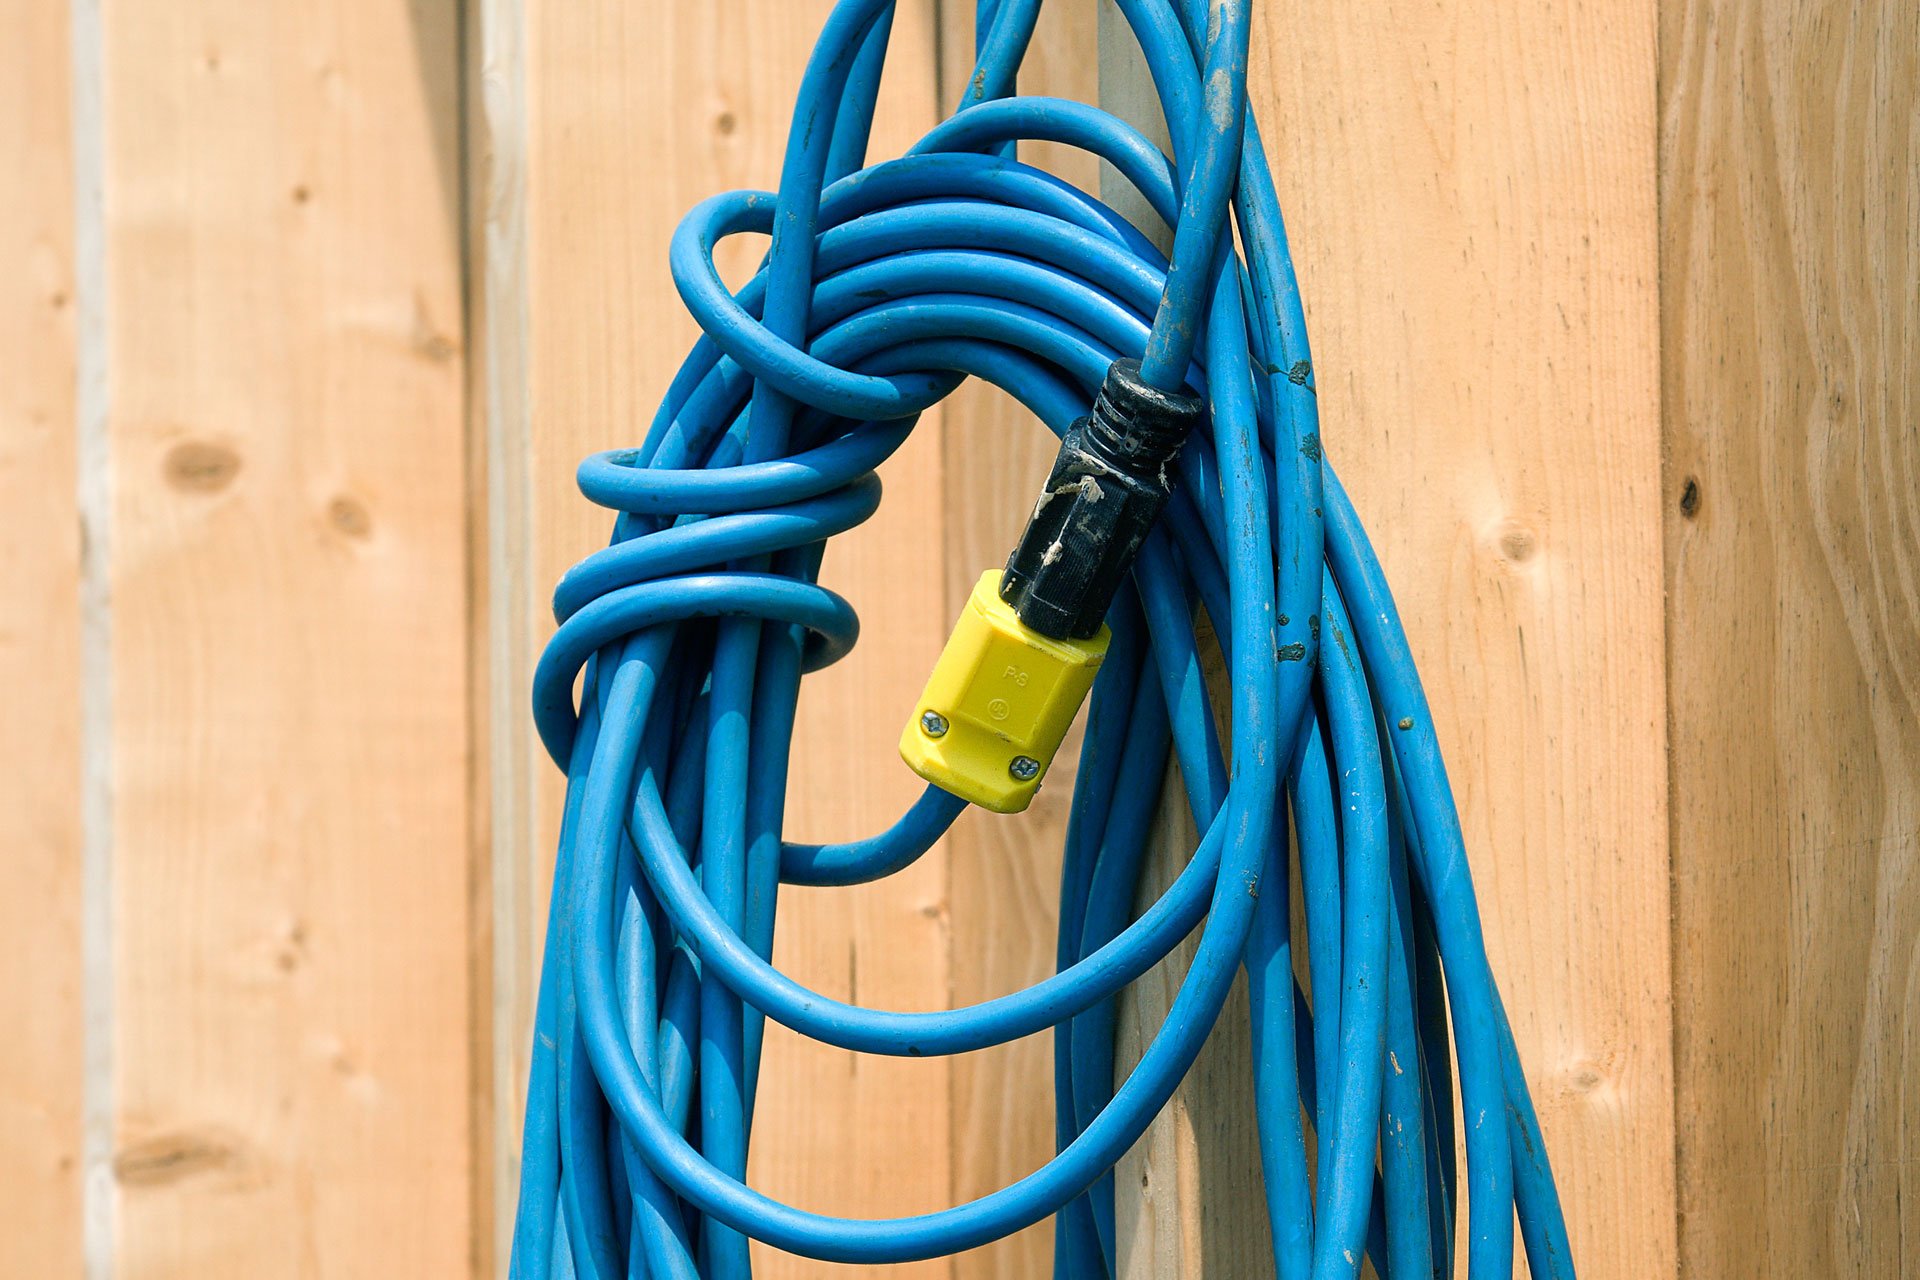 Outdoor Electric Cords - Are They Safe in Rain & Snow? - Shipley Energy